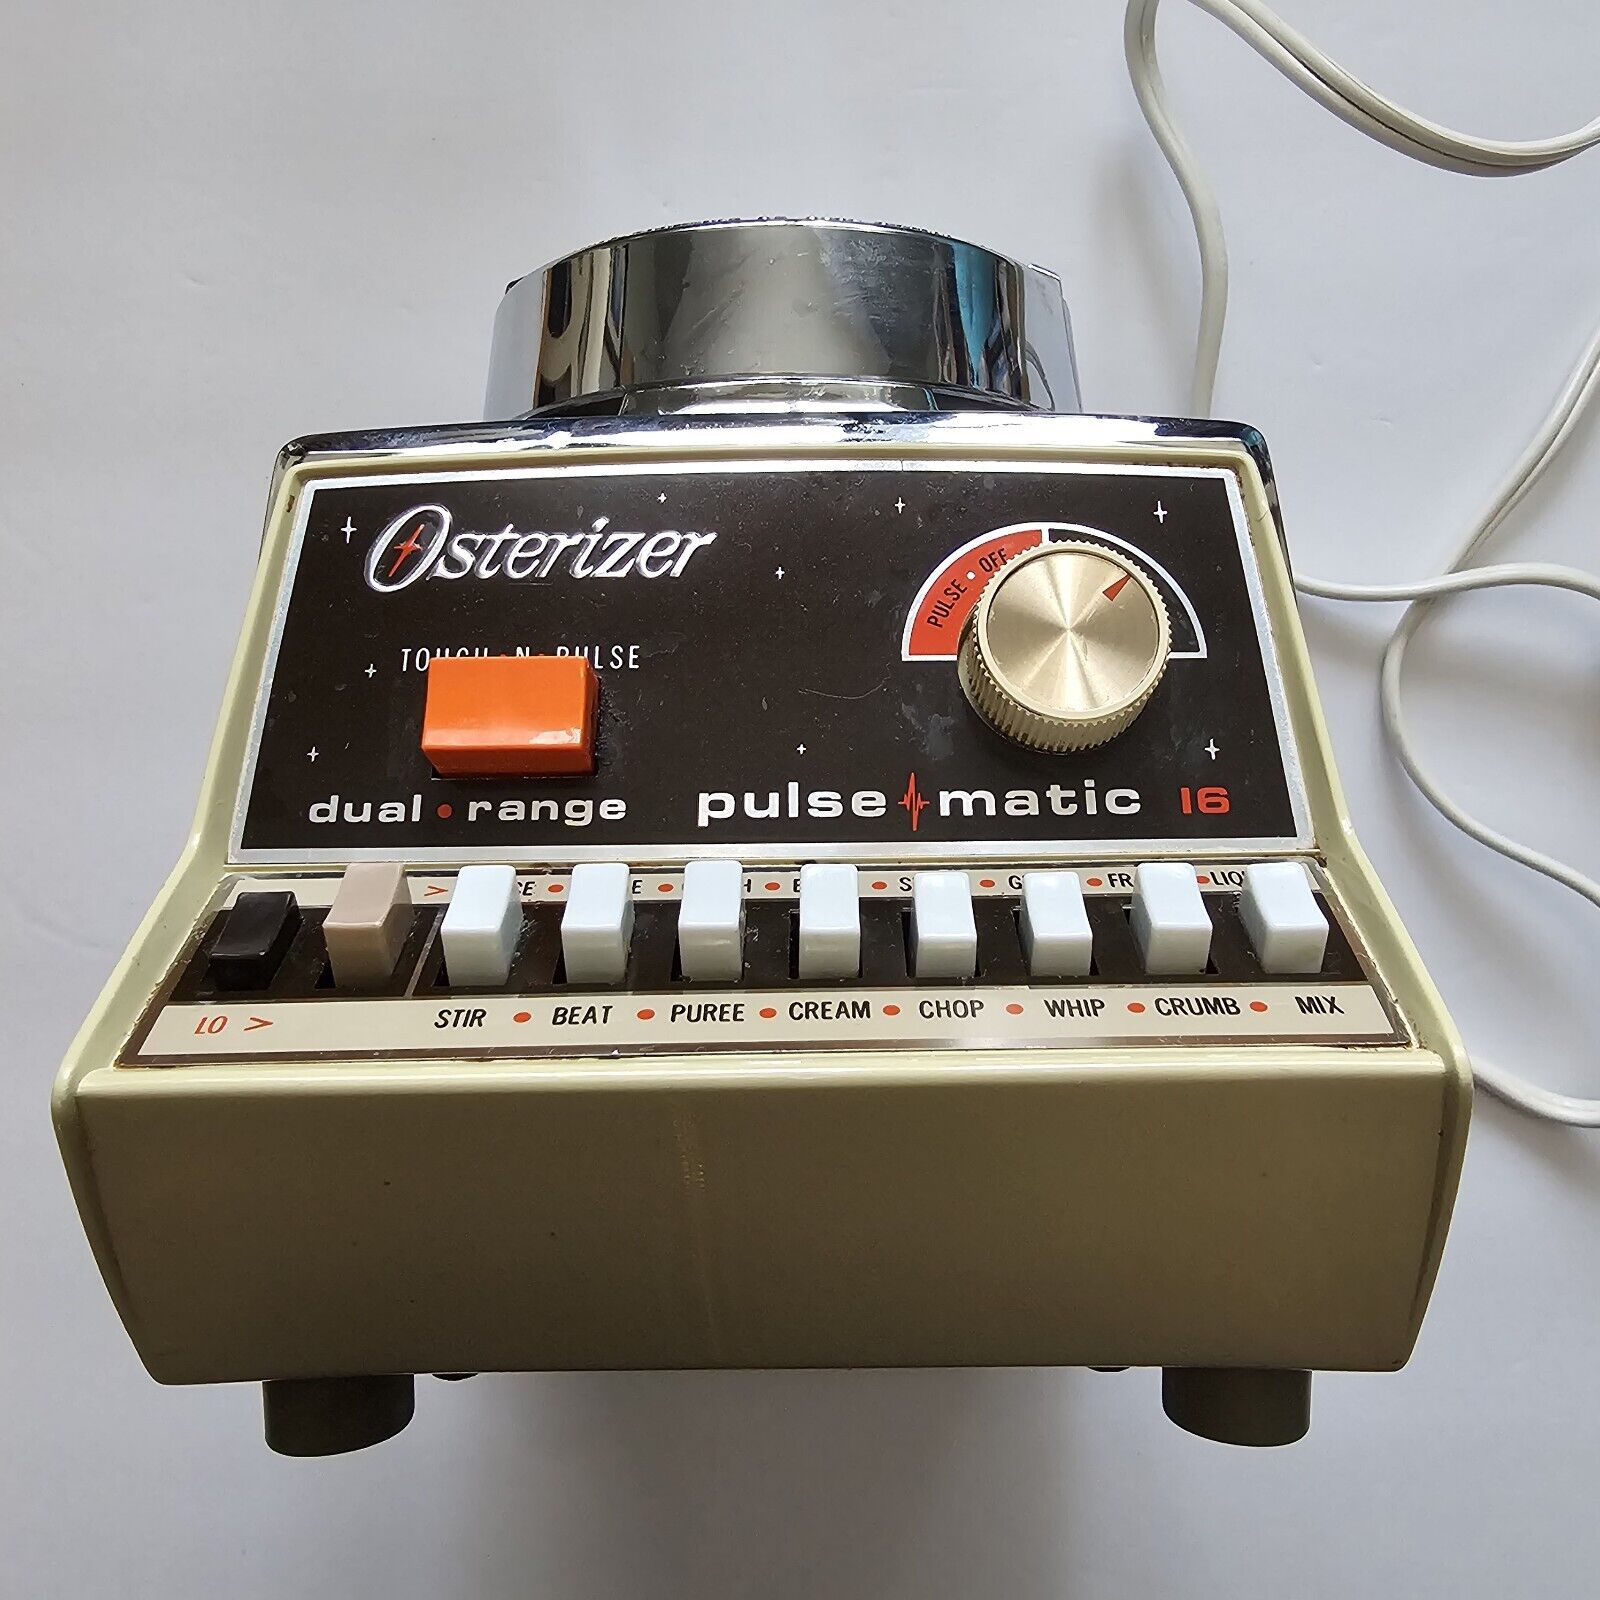 Osterizer Pulse Matic 16 Blender Avocado Chrome Parts Only Vintage 1970s